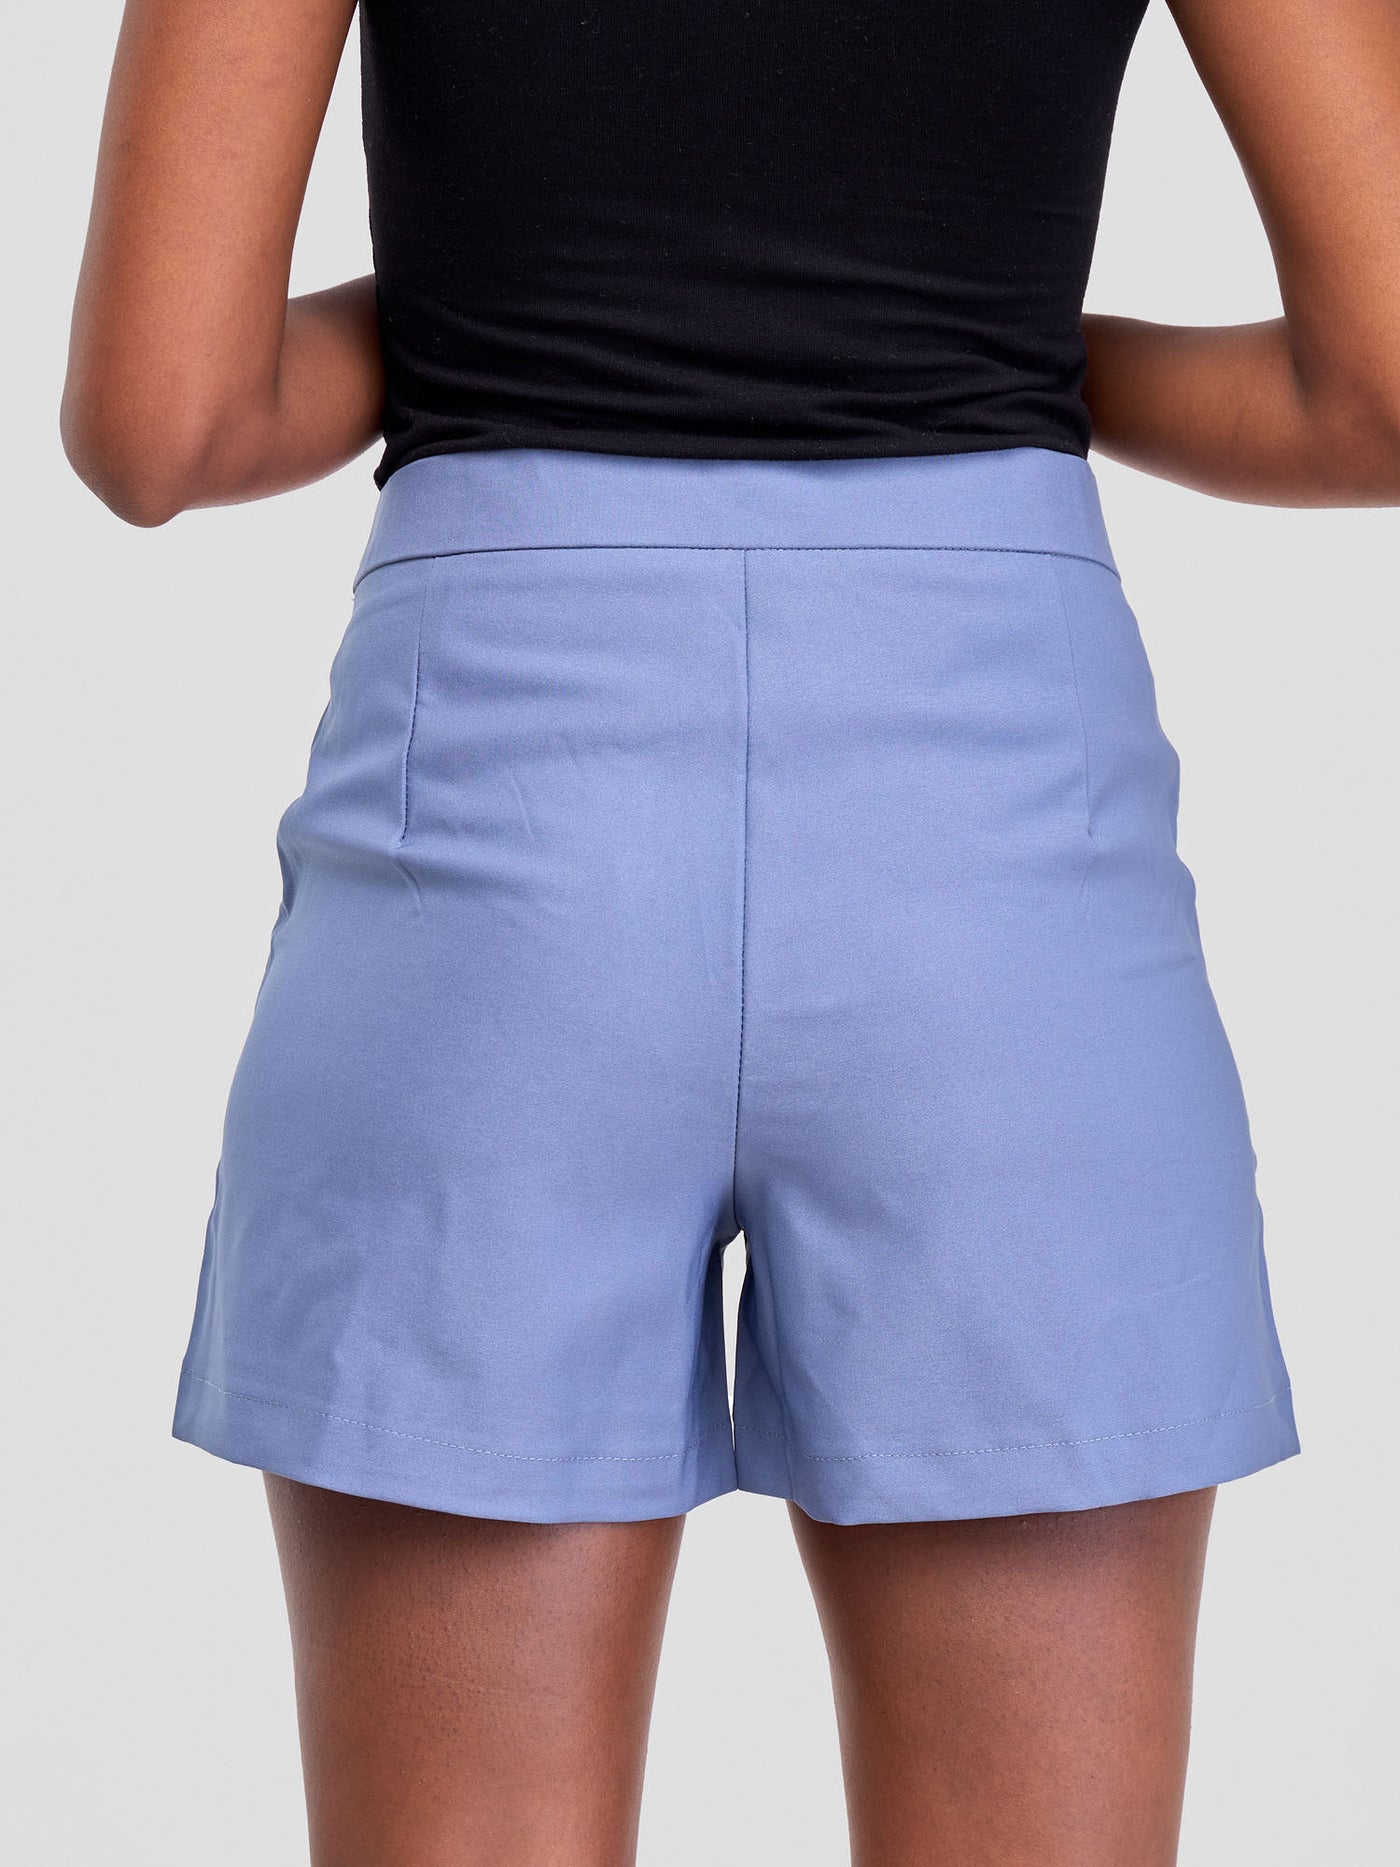 Anika Shorts with Clip - Slate Blue